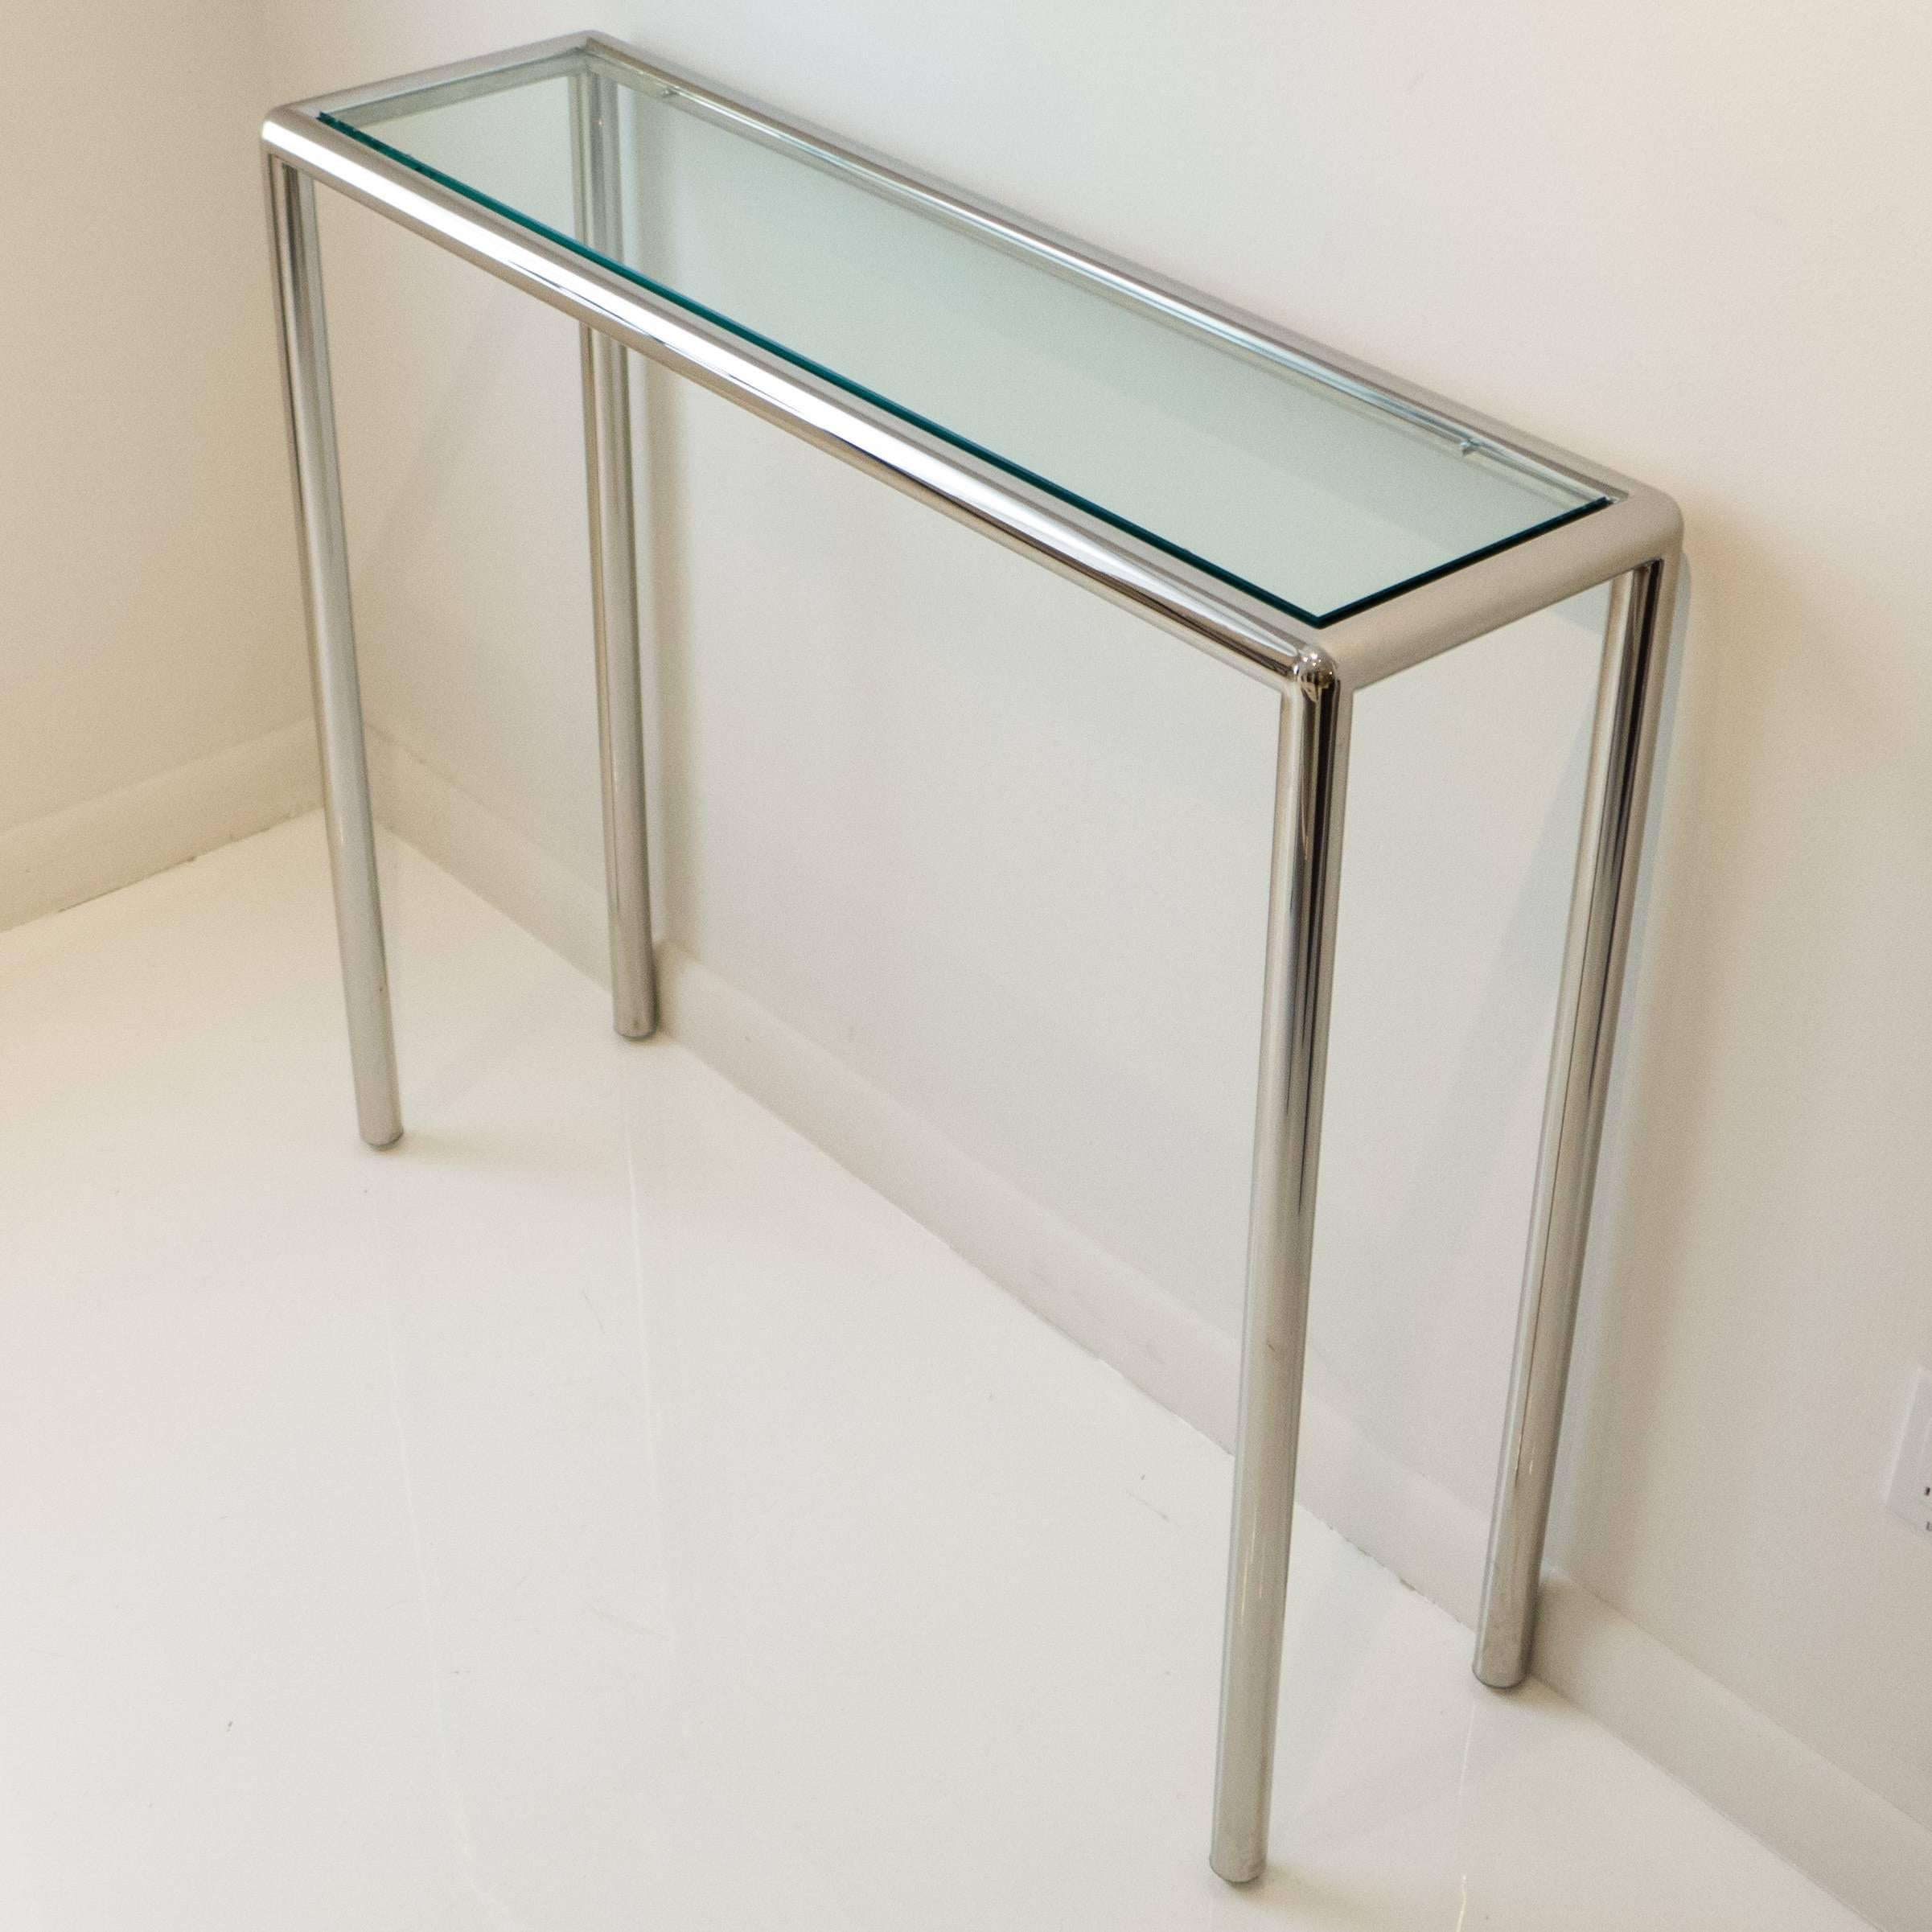 Tubular chrome-plated steel console table with glass top, in a custom tall, narrow size. In the style of and perhaps by John Mascheroni, circa 1970. The unusual conformation could work in an entryway, under an artwork, or as a small server. With